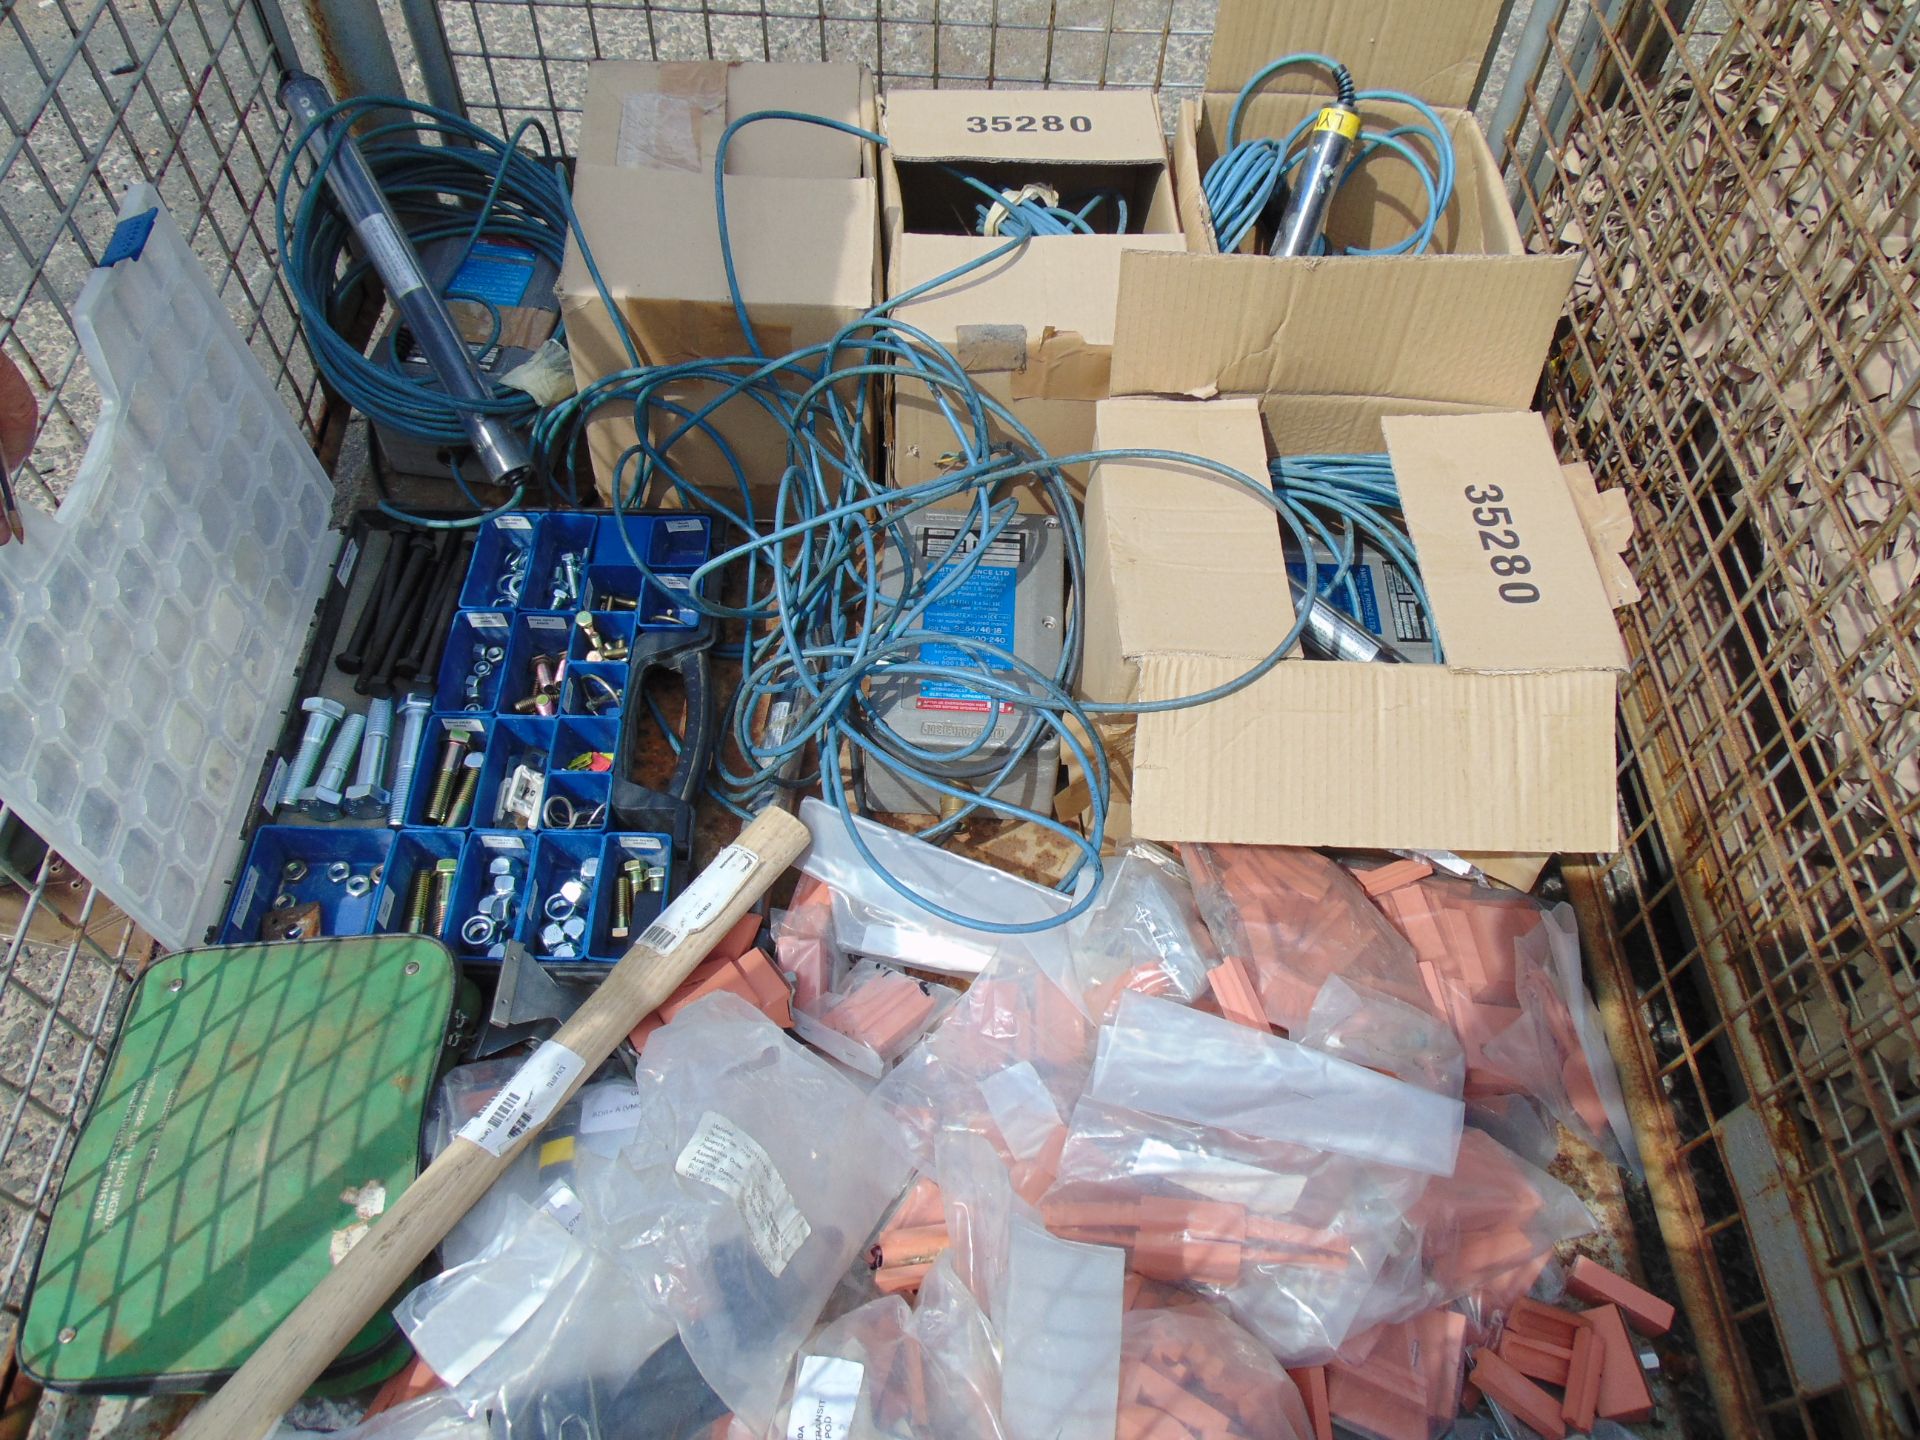 LED Inspection Lamps (6) Nuts and Bolts Box Etc